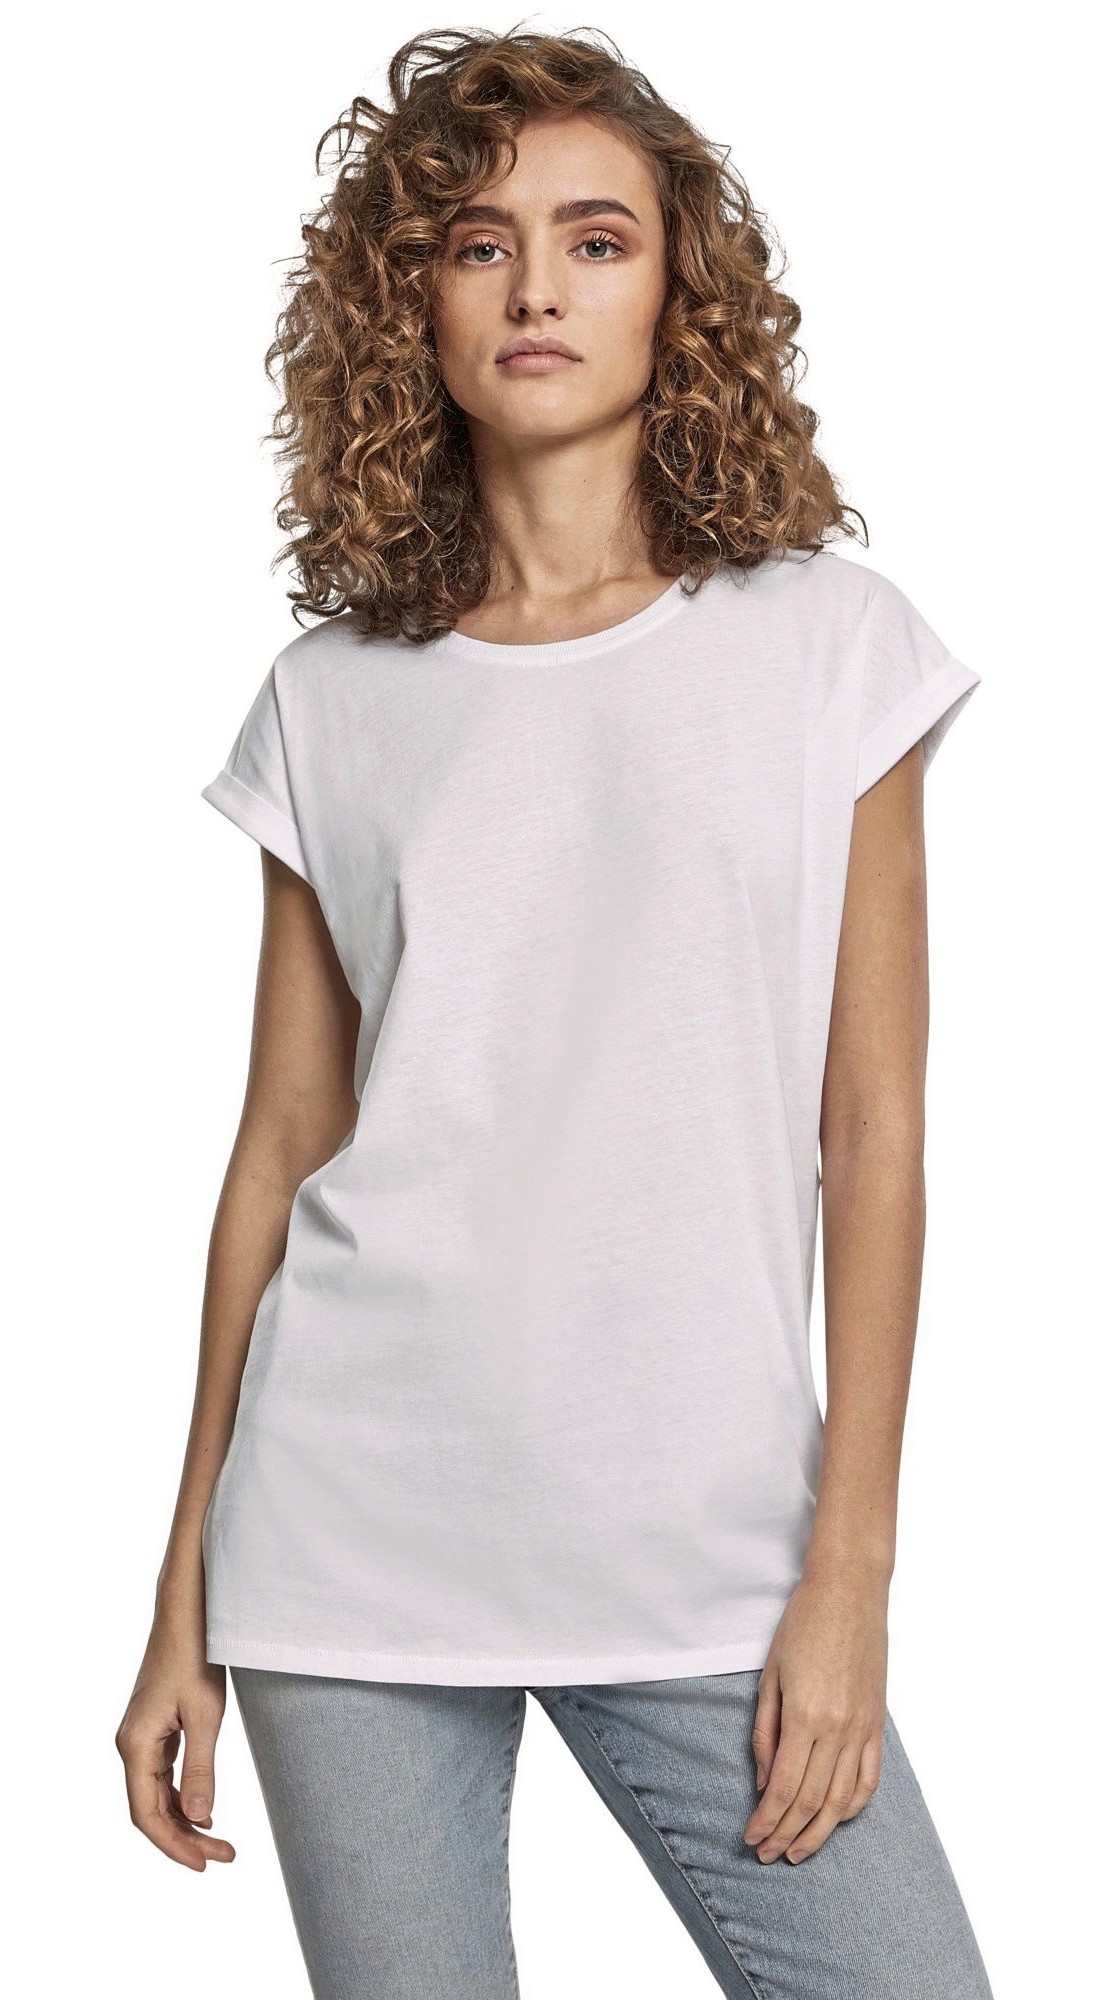 Rundhals Shirts - Build Your Brand - Ladies´ Organic Extended Shoulder Tee - BY138